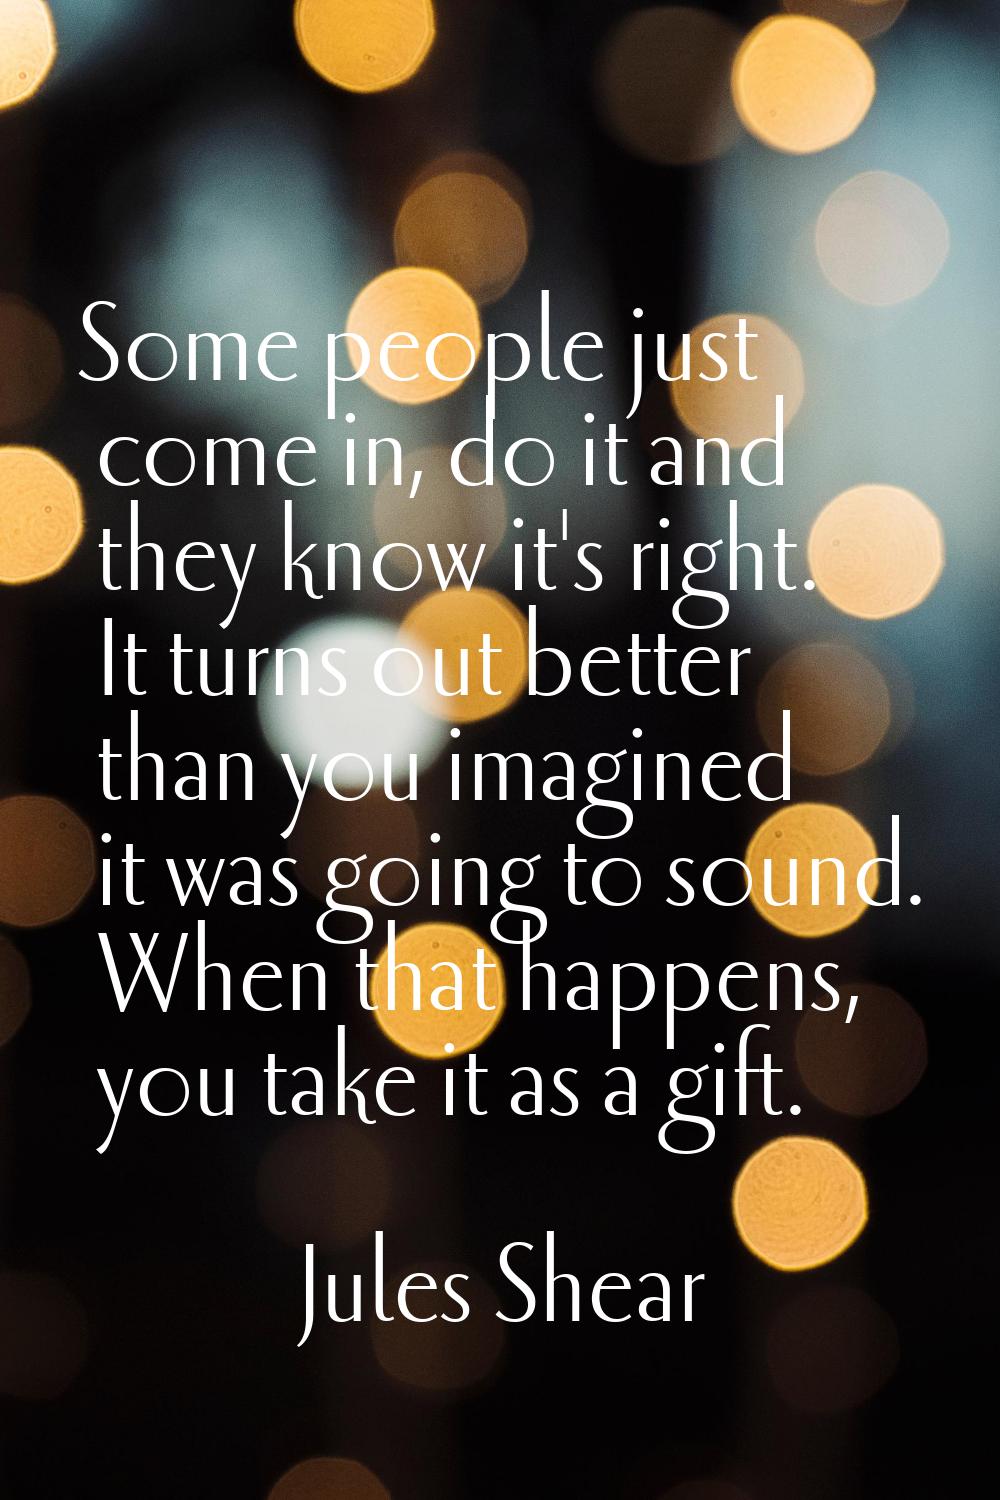 Some people just come in, do it and they know it's right. It turns out better than you imagined it 